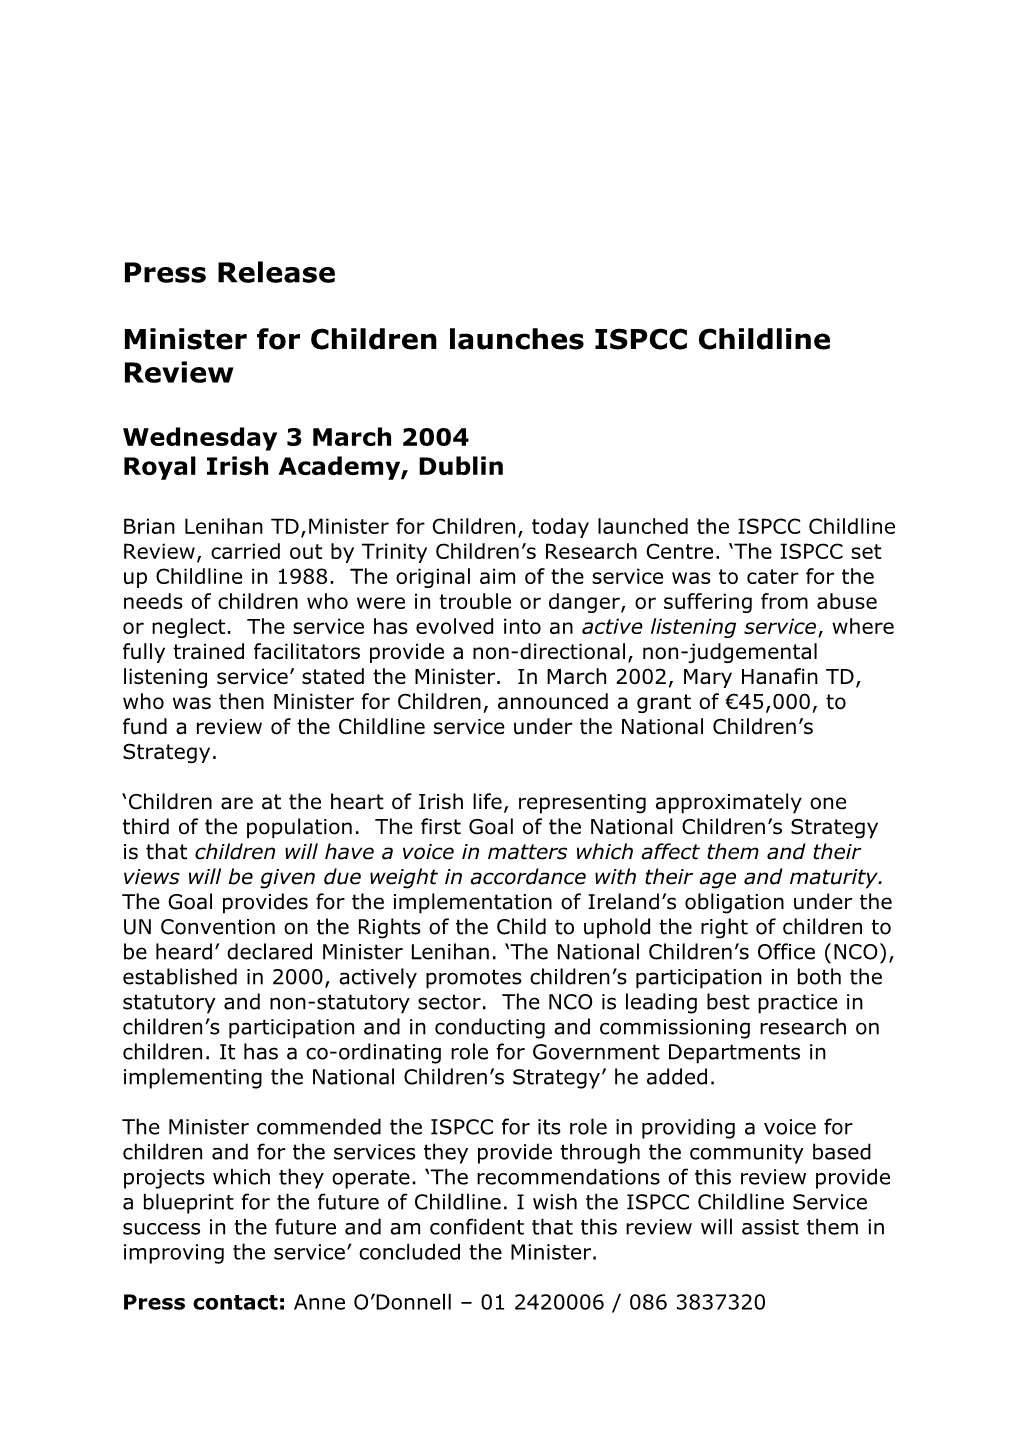 Minister for Children Launches ISPCC Childline Review